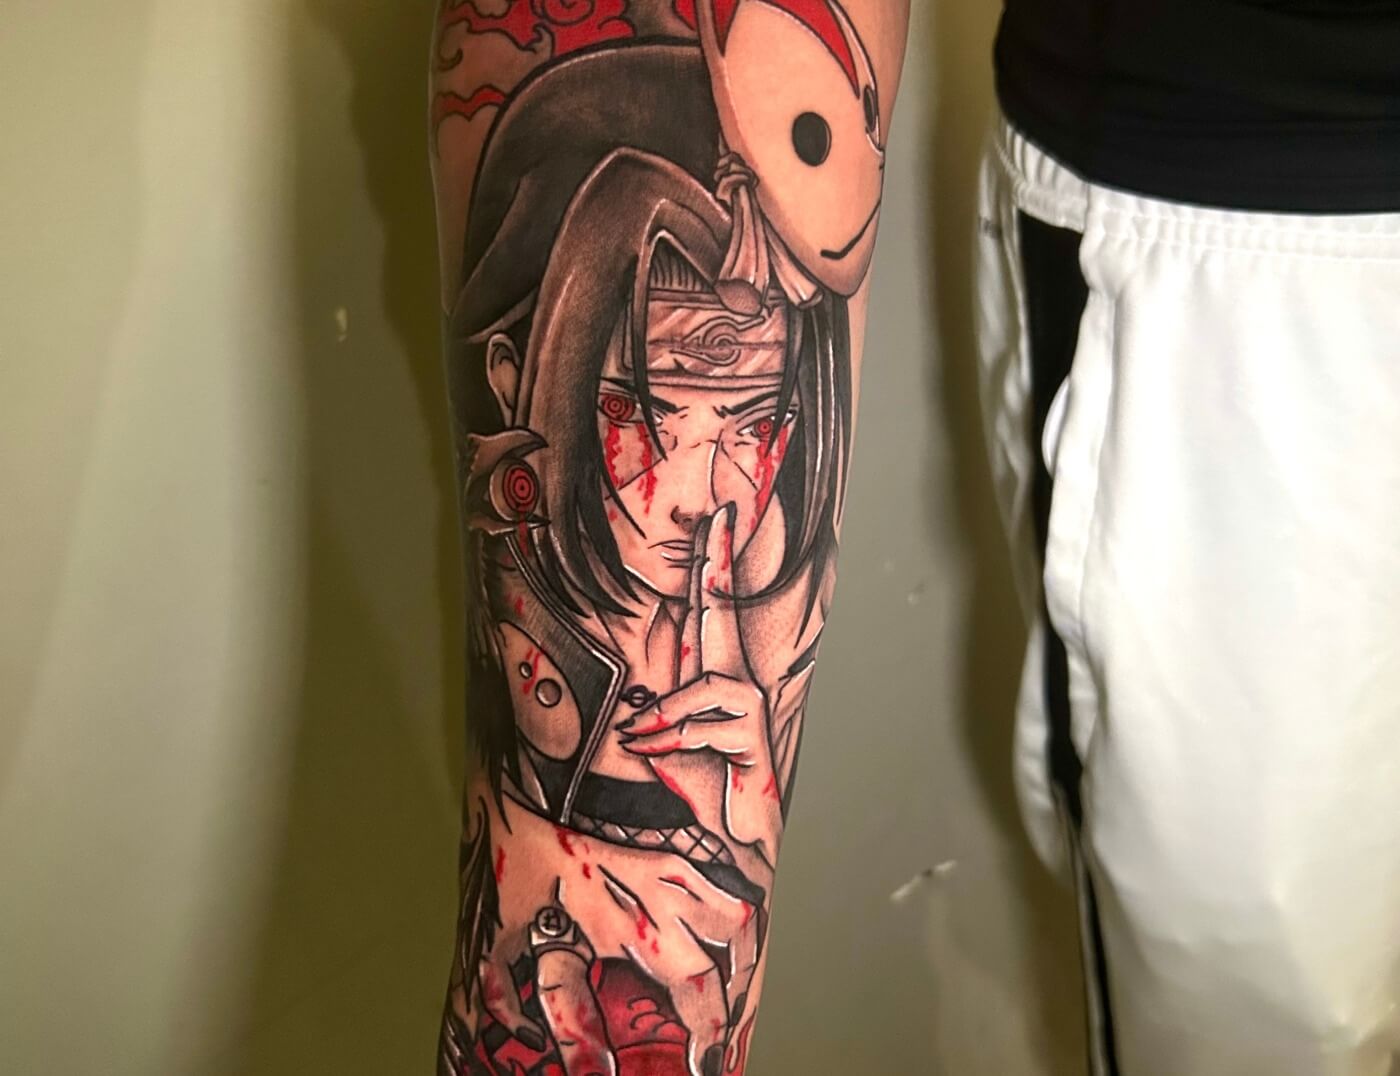 Itachi Uchiha Manga Anime Tattoo In black & red ink by Lyric TheArtist At Iron Palm Tattoos in south downtown Atlanta, GA. is a character in the Naruto manga and anime series created by Masashi Kishimoto. Itachi is the older brother of Sasuke Uchiha and is responsible for killing all the members of their clan... sparing only Sasuke. Call 404-973-7828 or stop by for a free consultation with Lyric or another Iron Palm Tattoos client. Walk Ins are welcome.